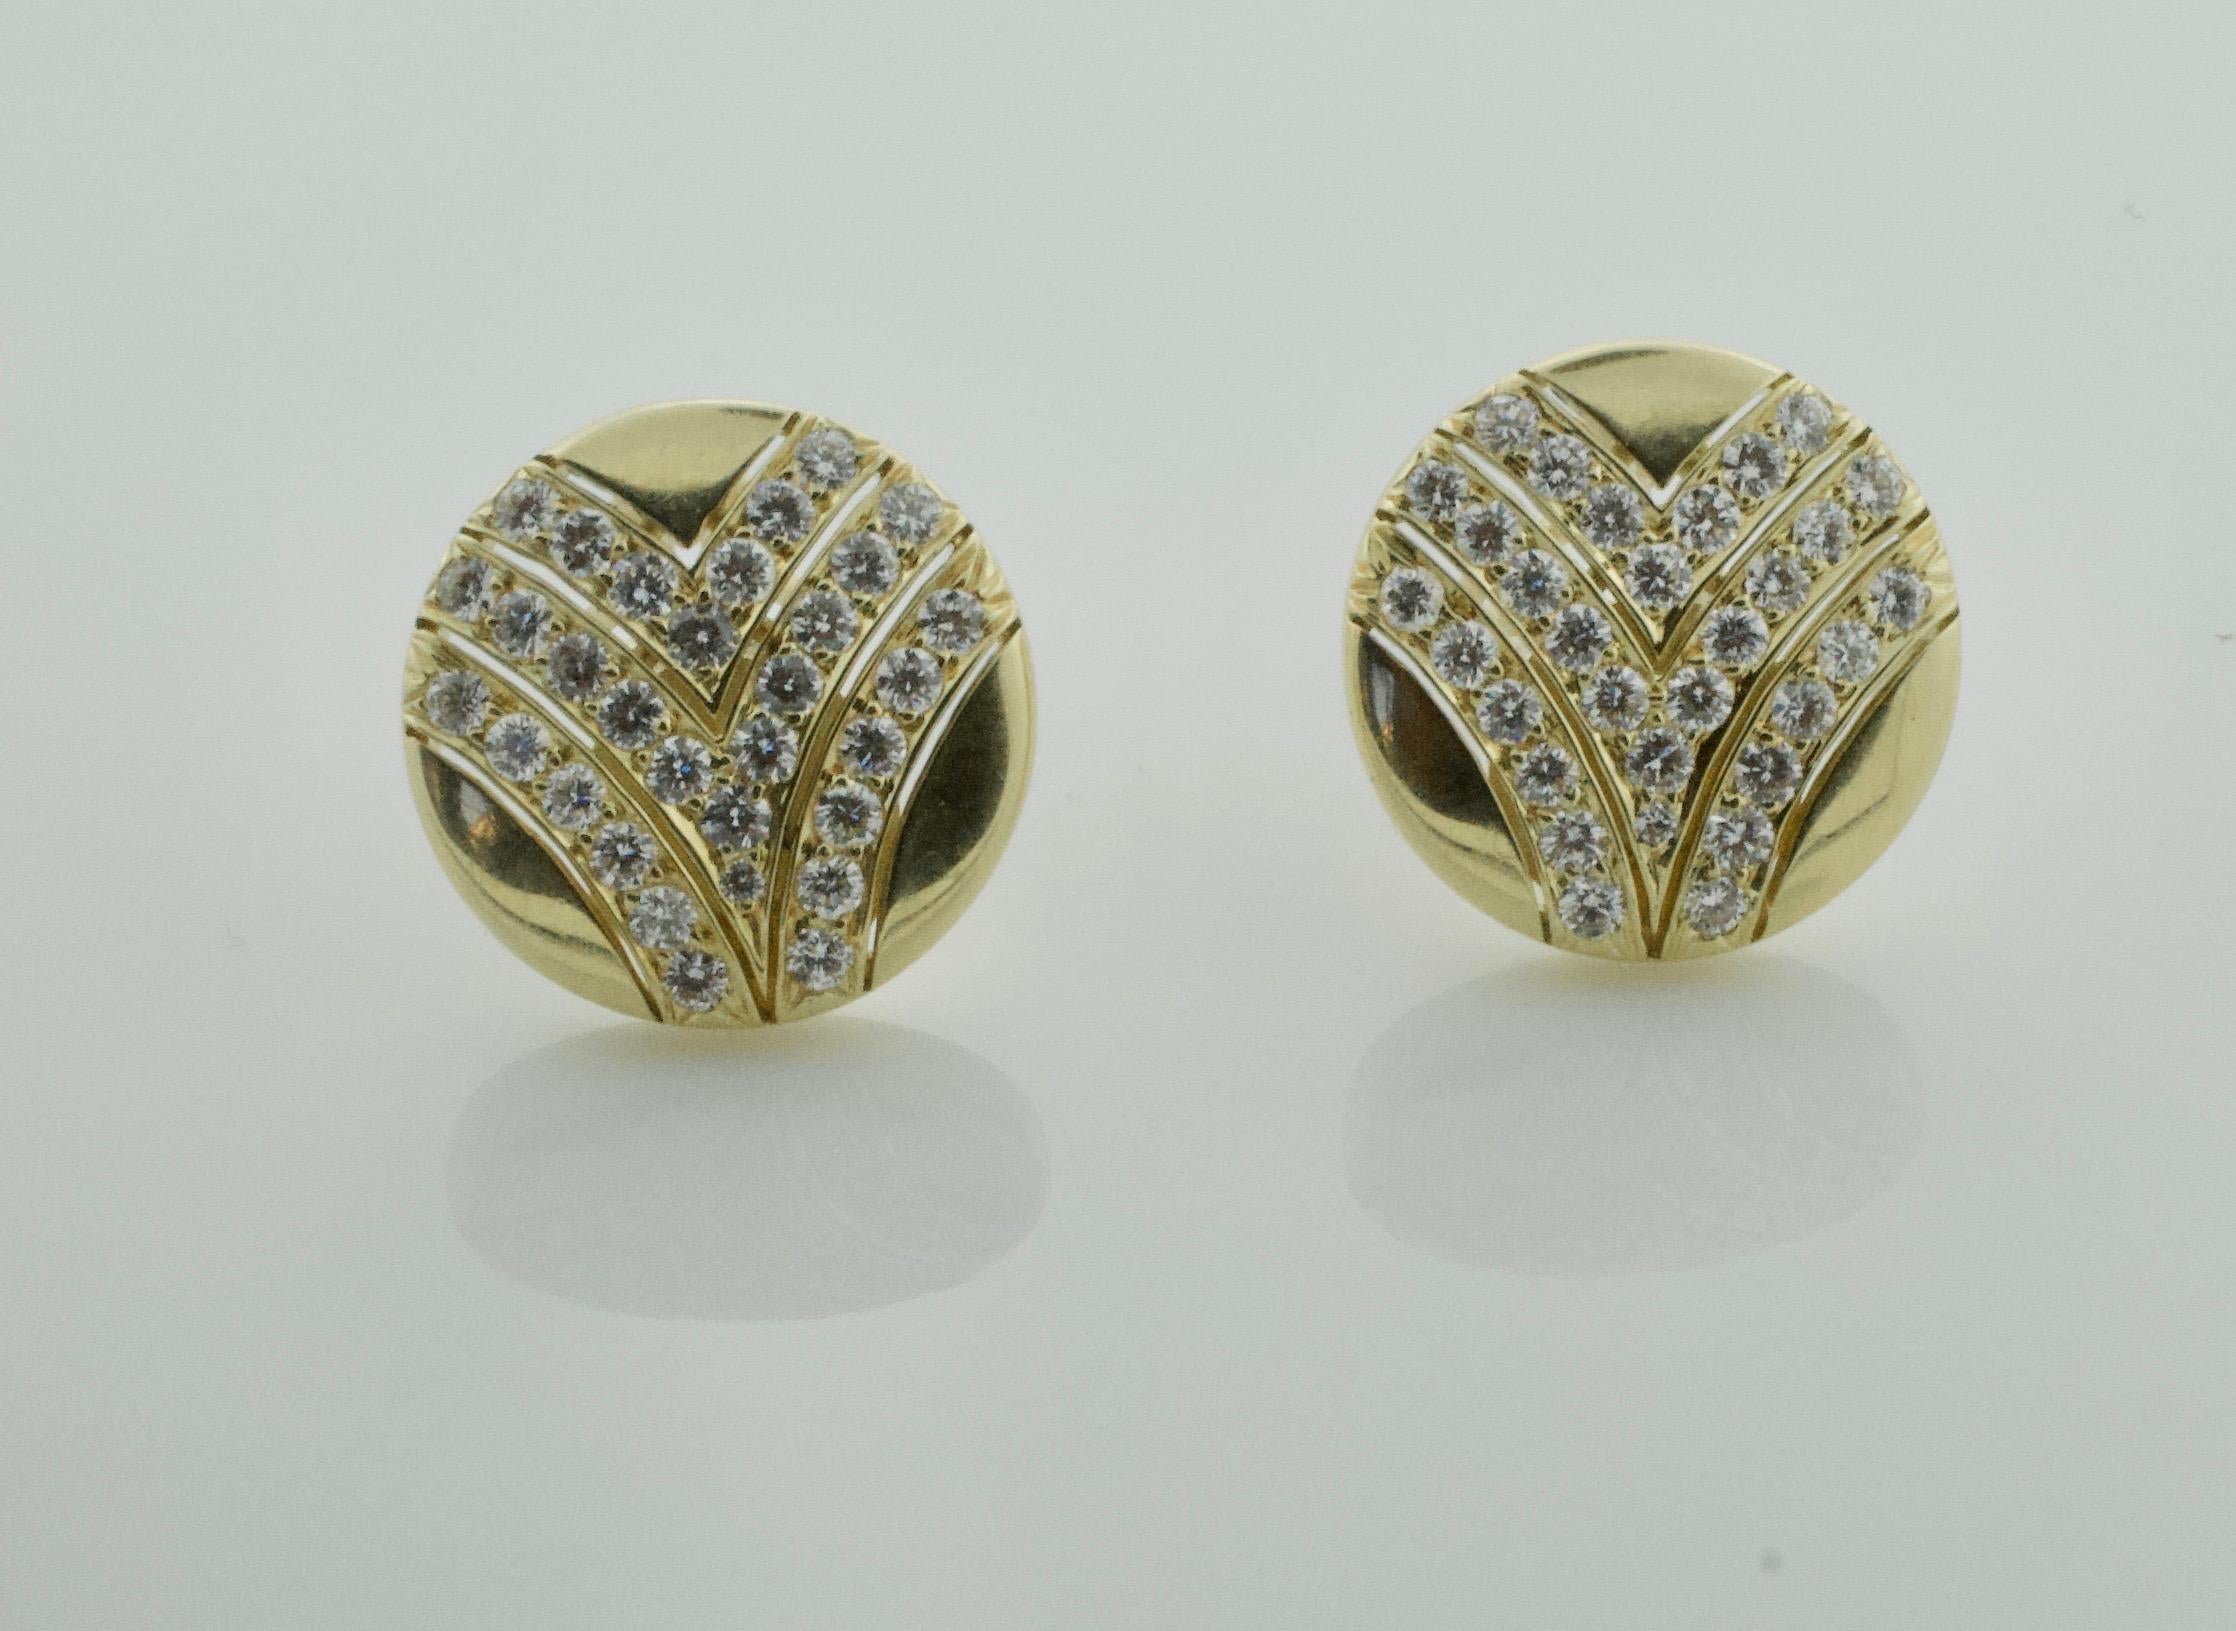 Fashionable 18k Diamond Clip on Earrings  2.80 carats. Fine Quality
Sixty Two Round Brilliant Cut Diamonds weighing 2.80 carats approximately [GH - VVS-VS1]
Posts can be easily added.
Superior Workmanship Throughout  